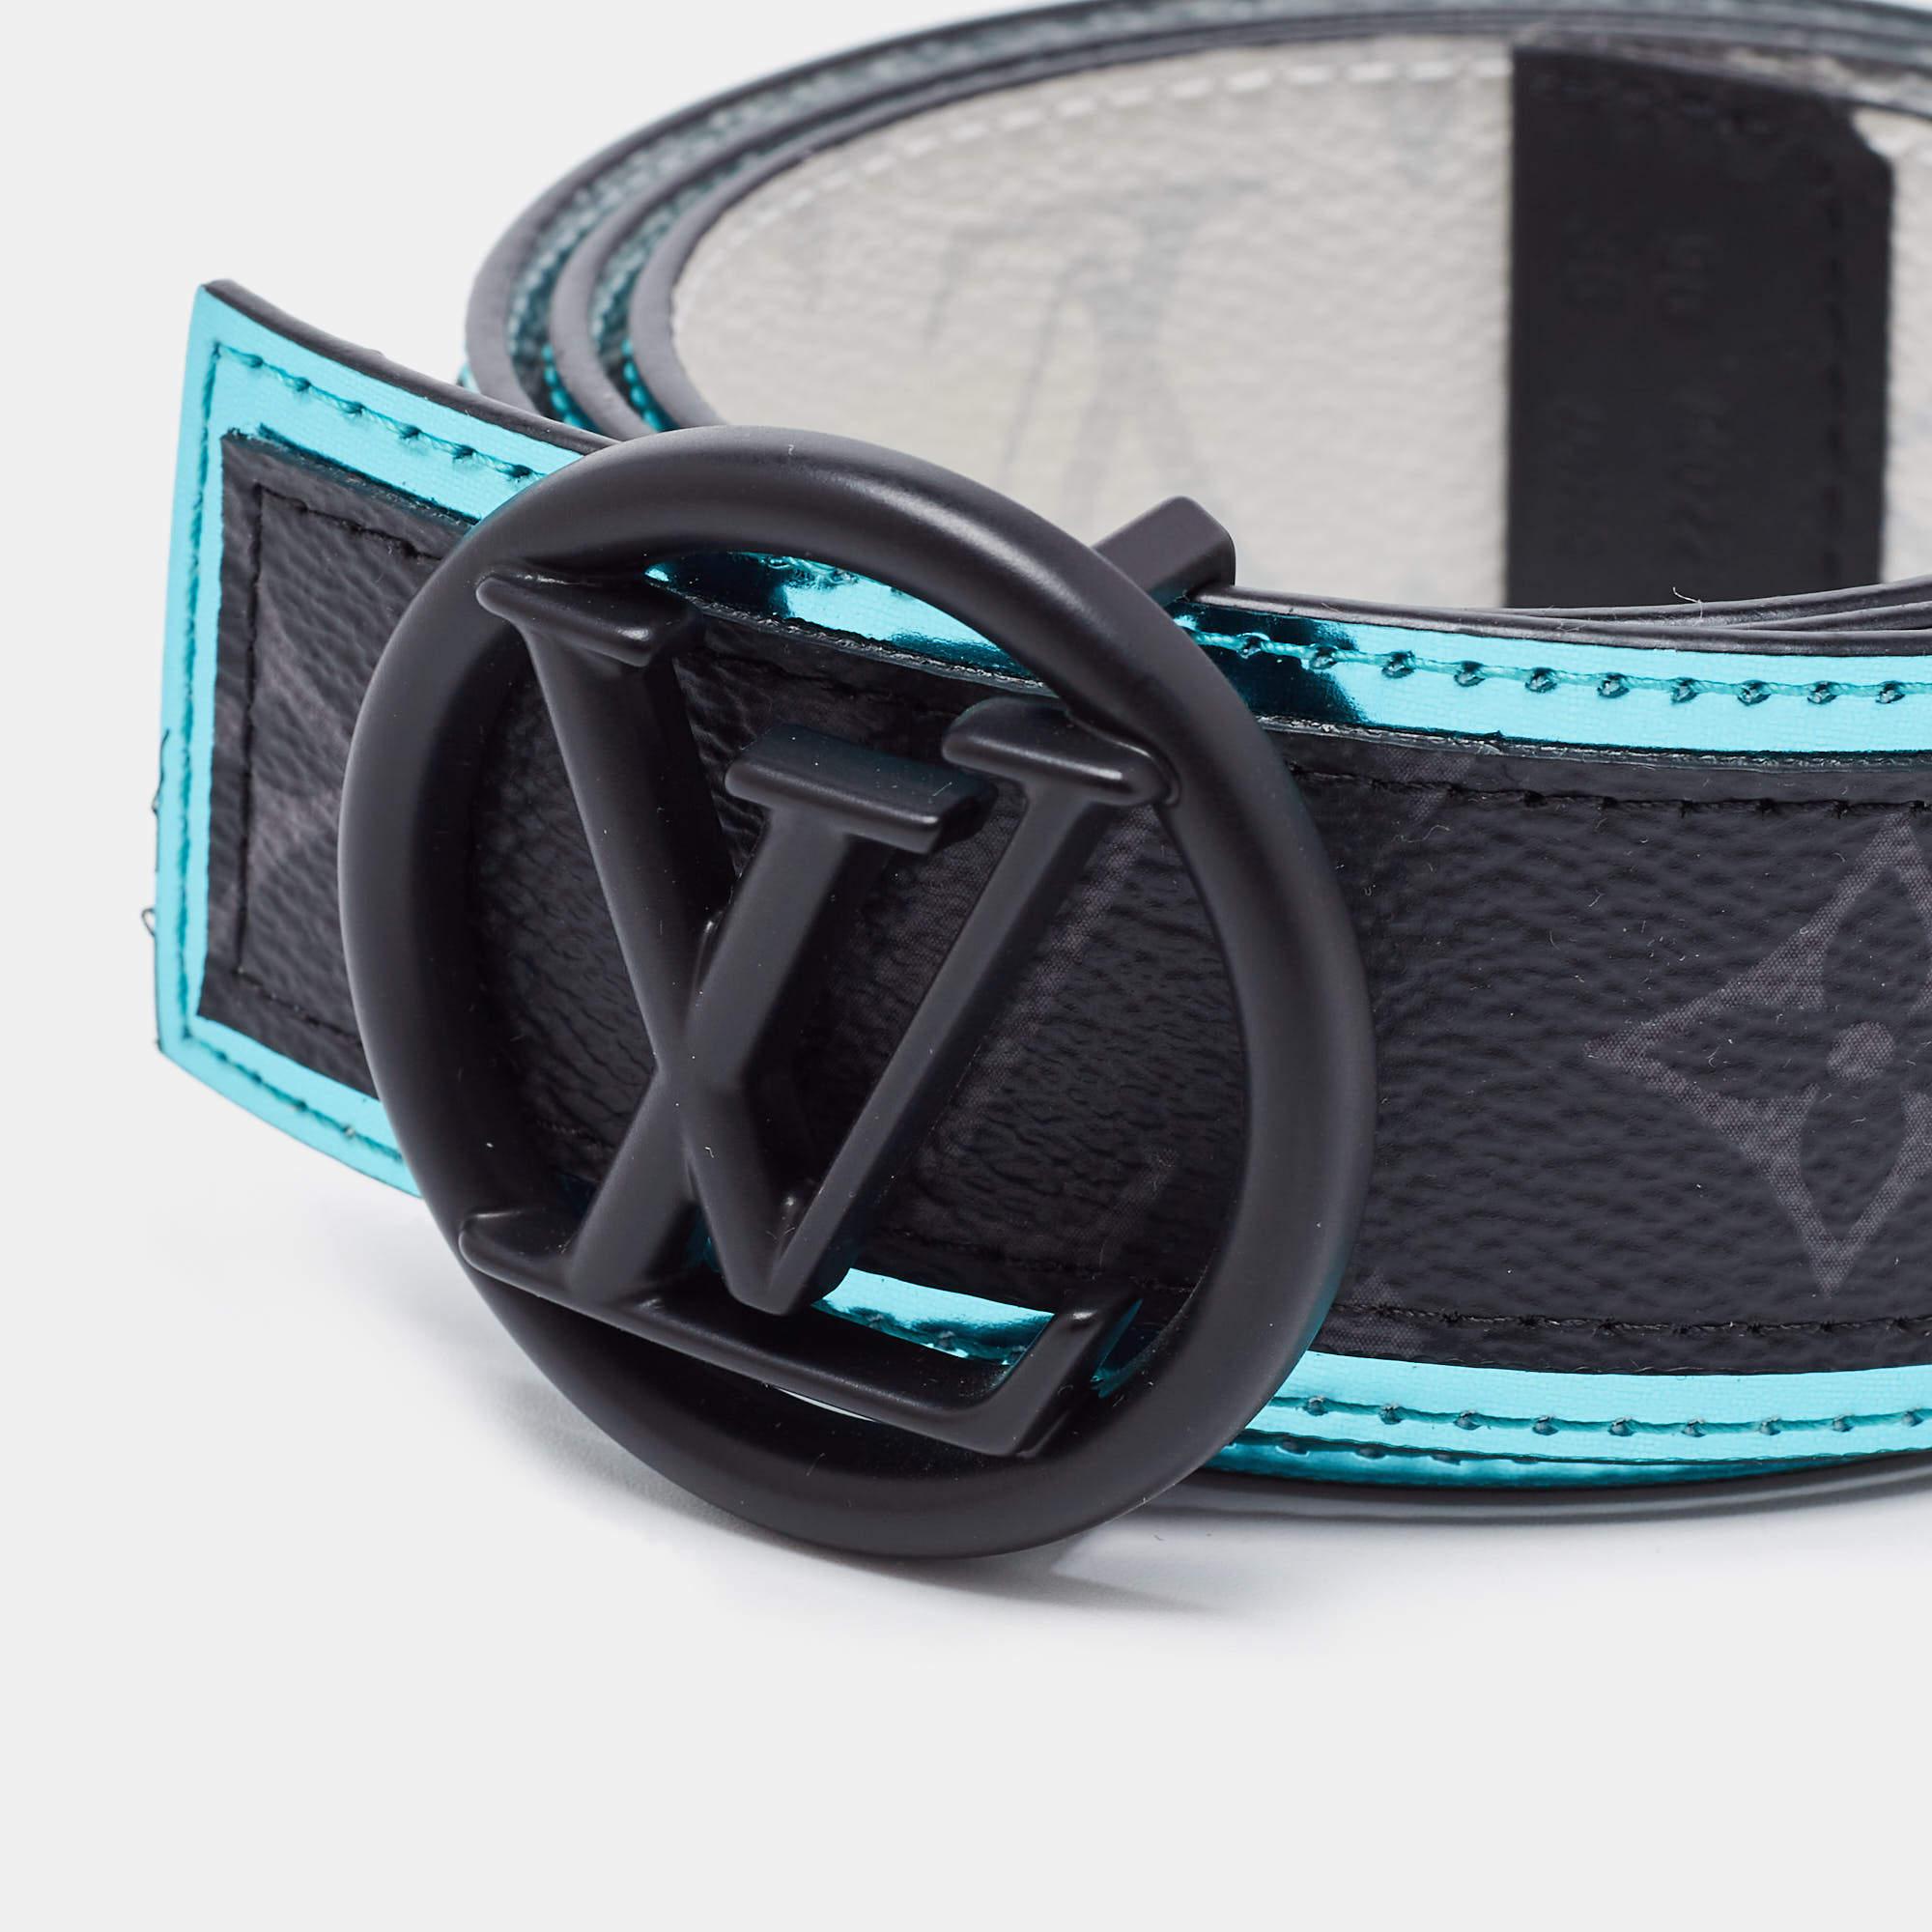 A classic add-on to your collection of belts is this Louis Vuitton piece. Cut to a convenient length, the belt has a smooth finish and a sturdy built. This wardrobe essential piece will continually complement your style.

Includes: Original Dustbag,